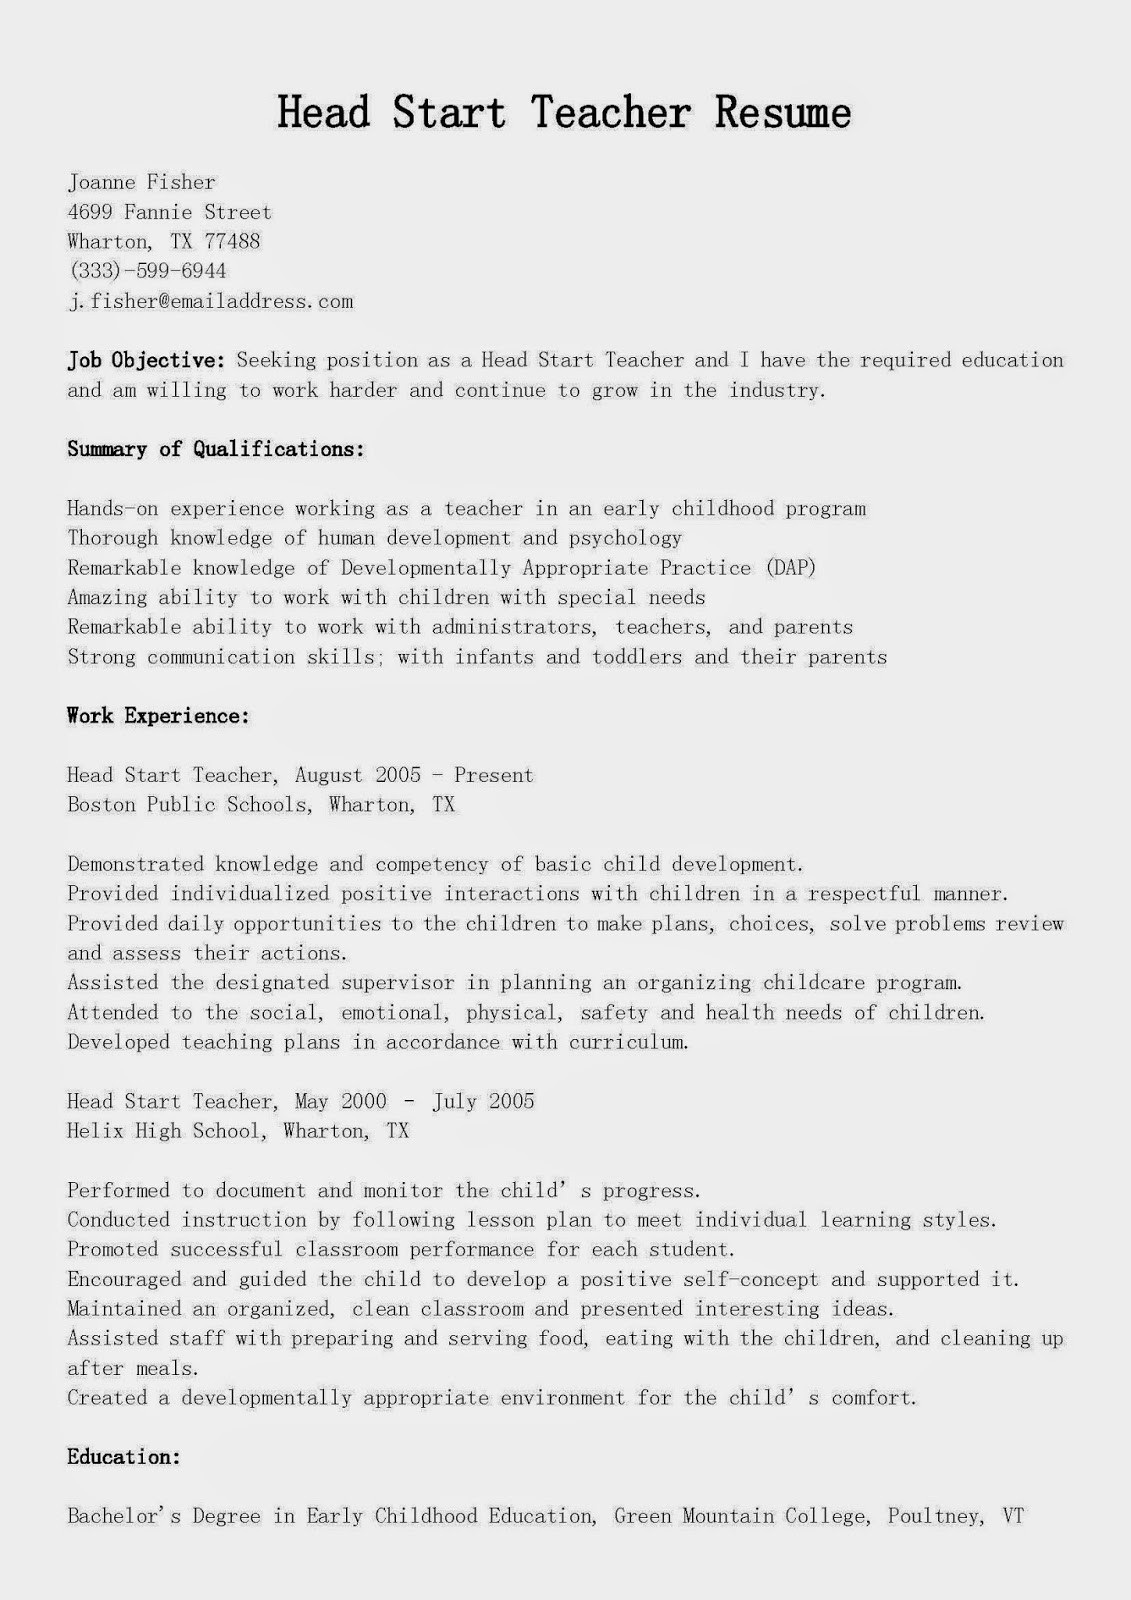 teacher cover letter template example-Cover Letter Example for Resume Beautiful Higher Education Cover Letters 13 Od Specialist Cover Letter Fire 17-e